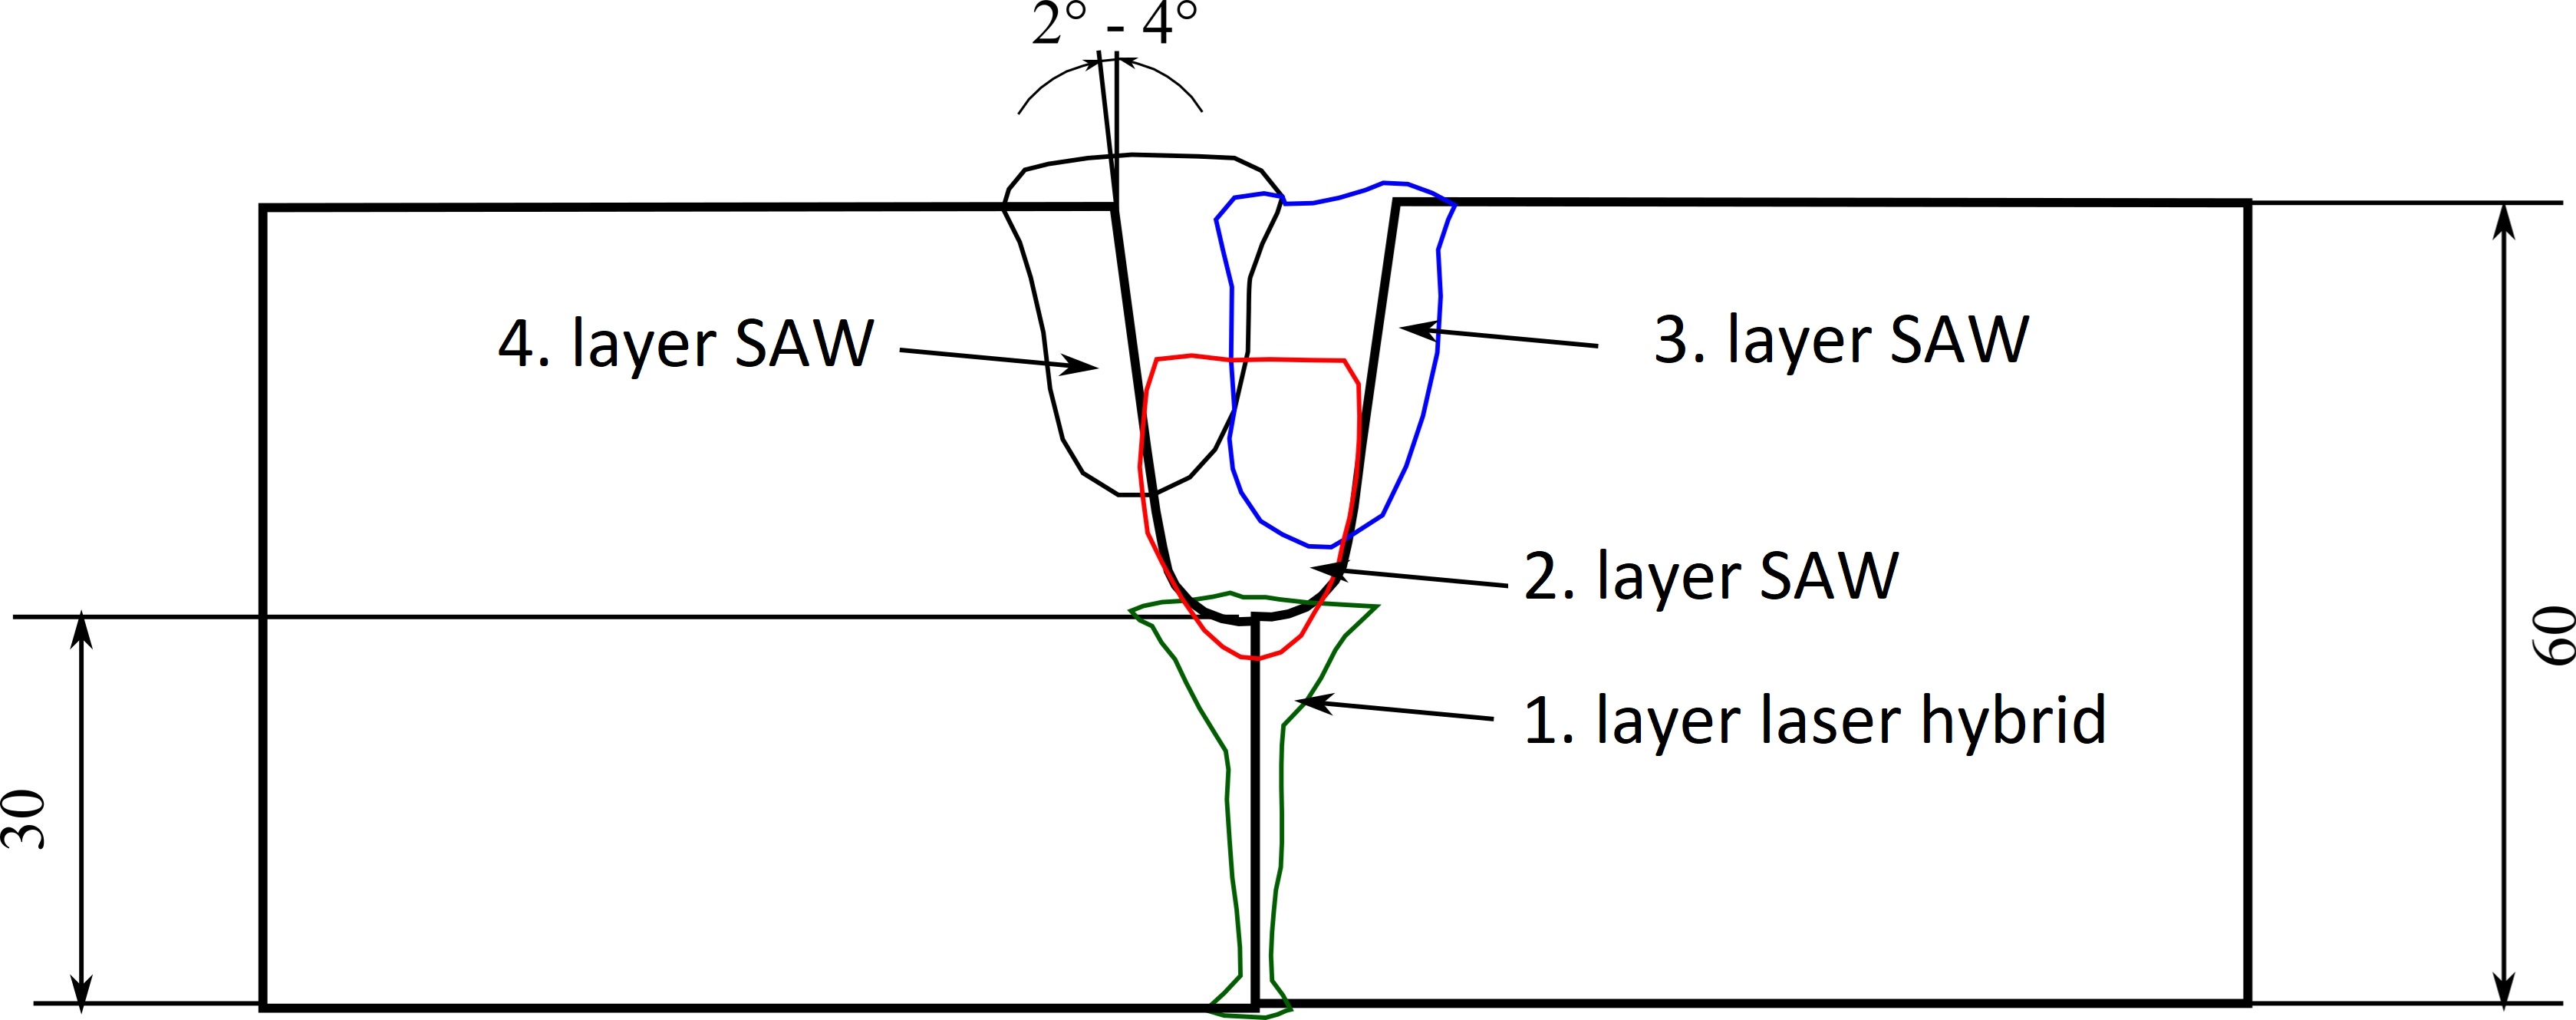 Schematic illustration of the welding layer sequence in the combination of laser hybrid and submerged arc welding (SAW).